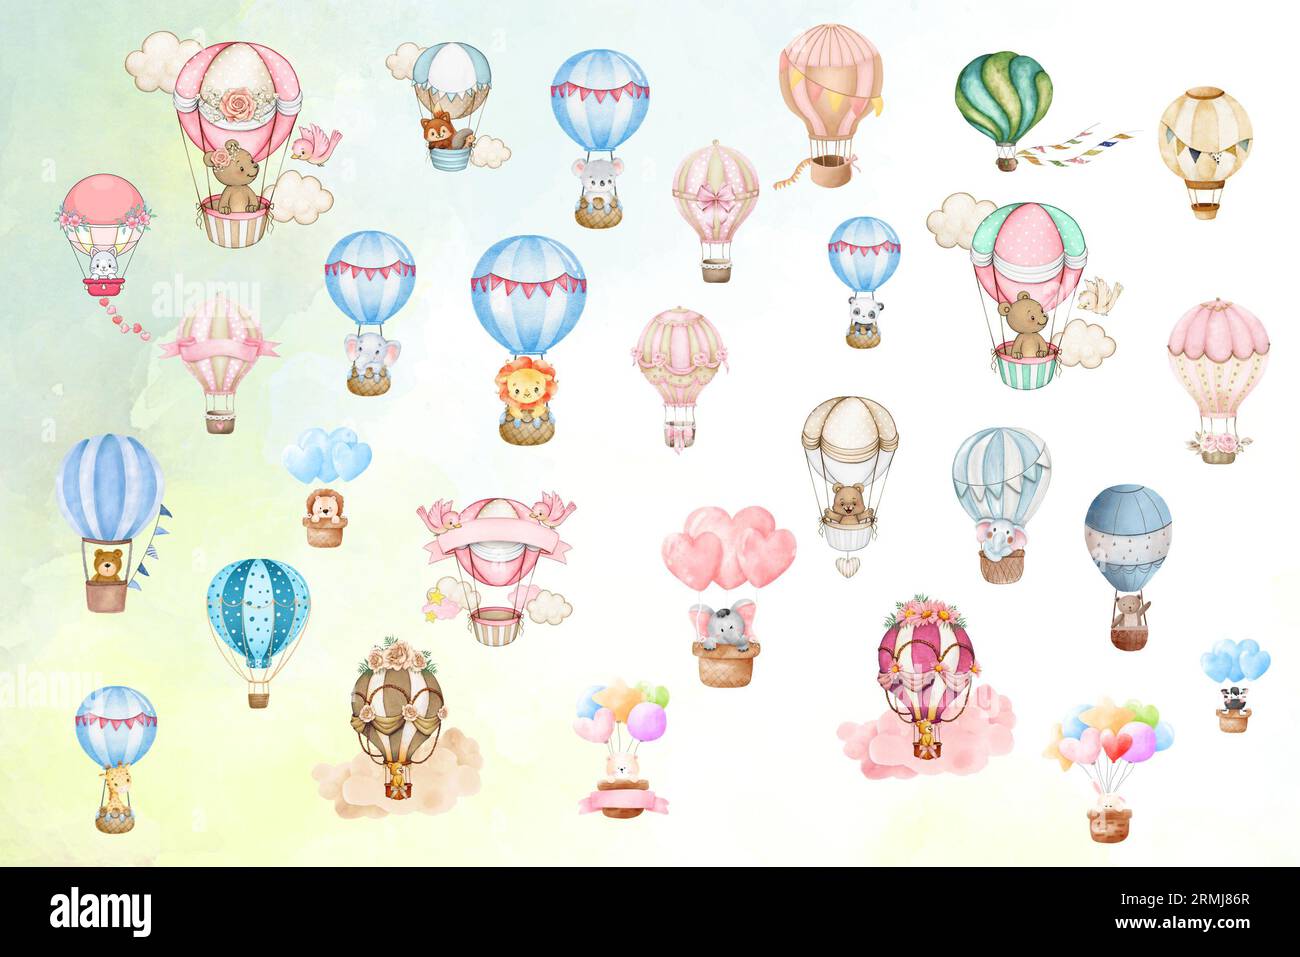 Watercolor hot air balloons with baby animals collection Stock Photo